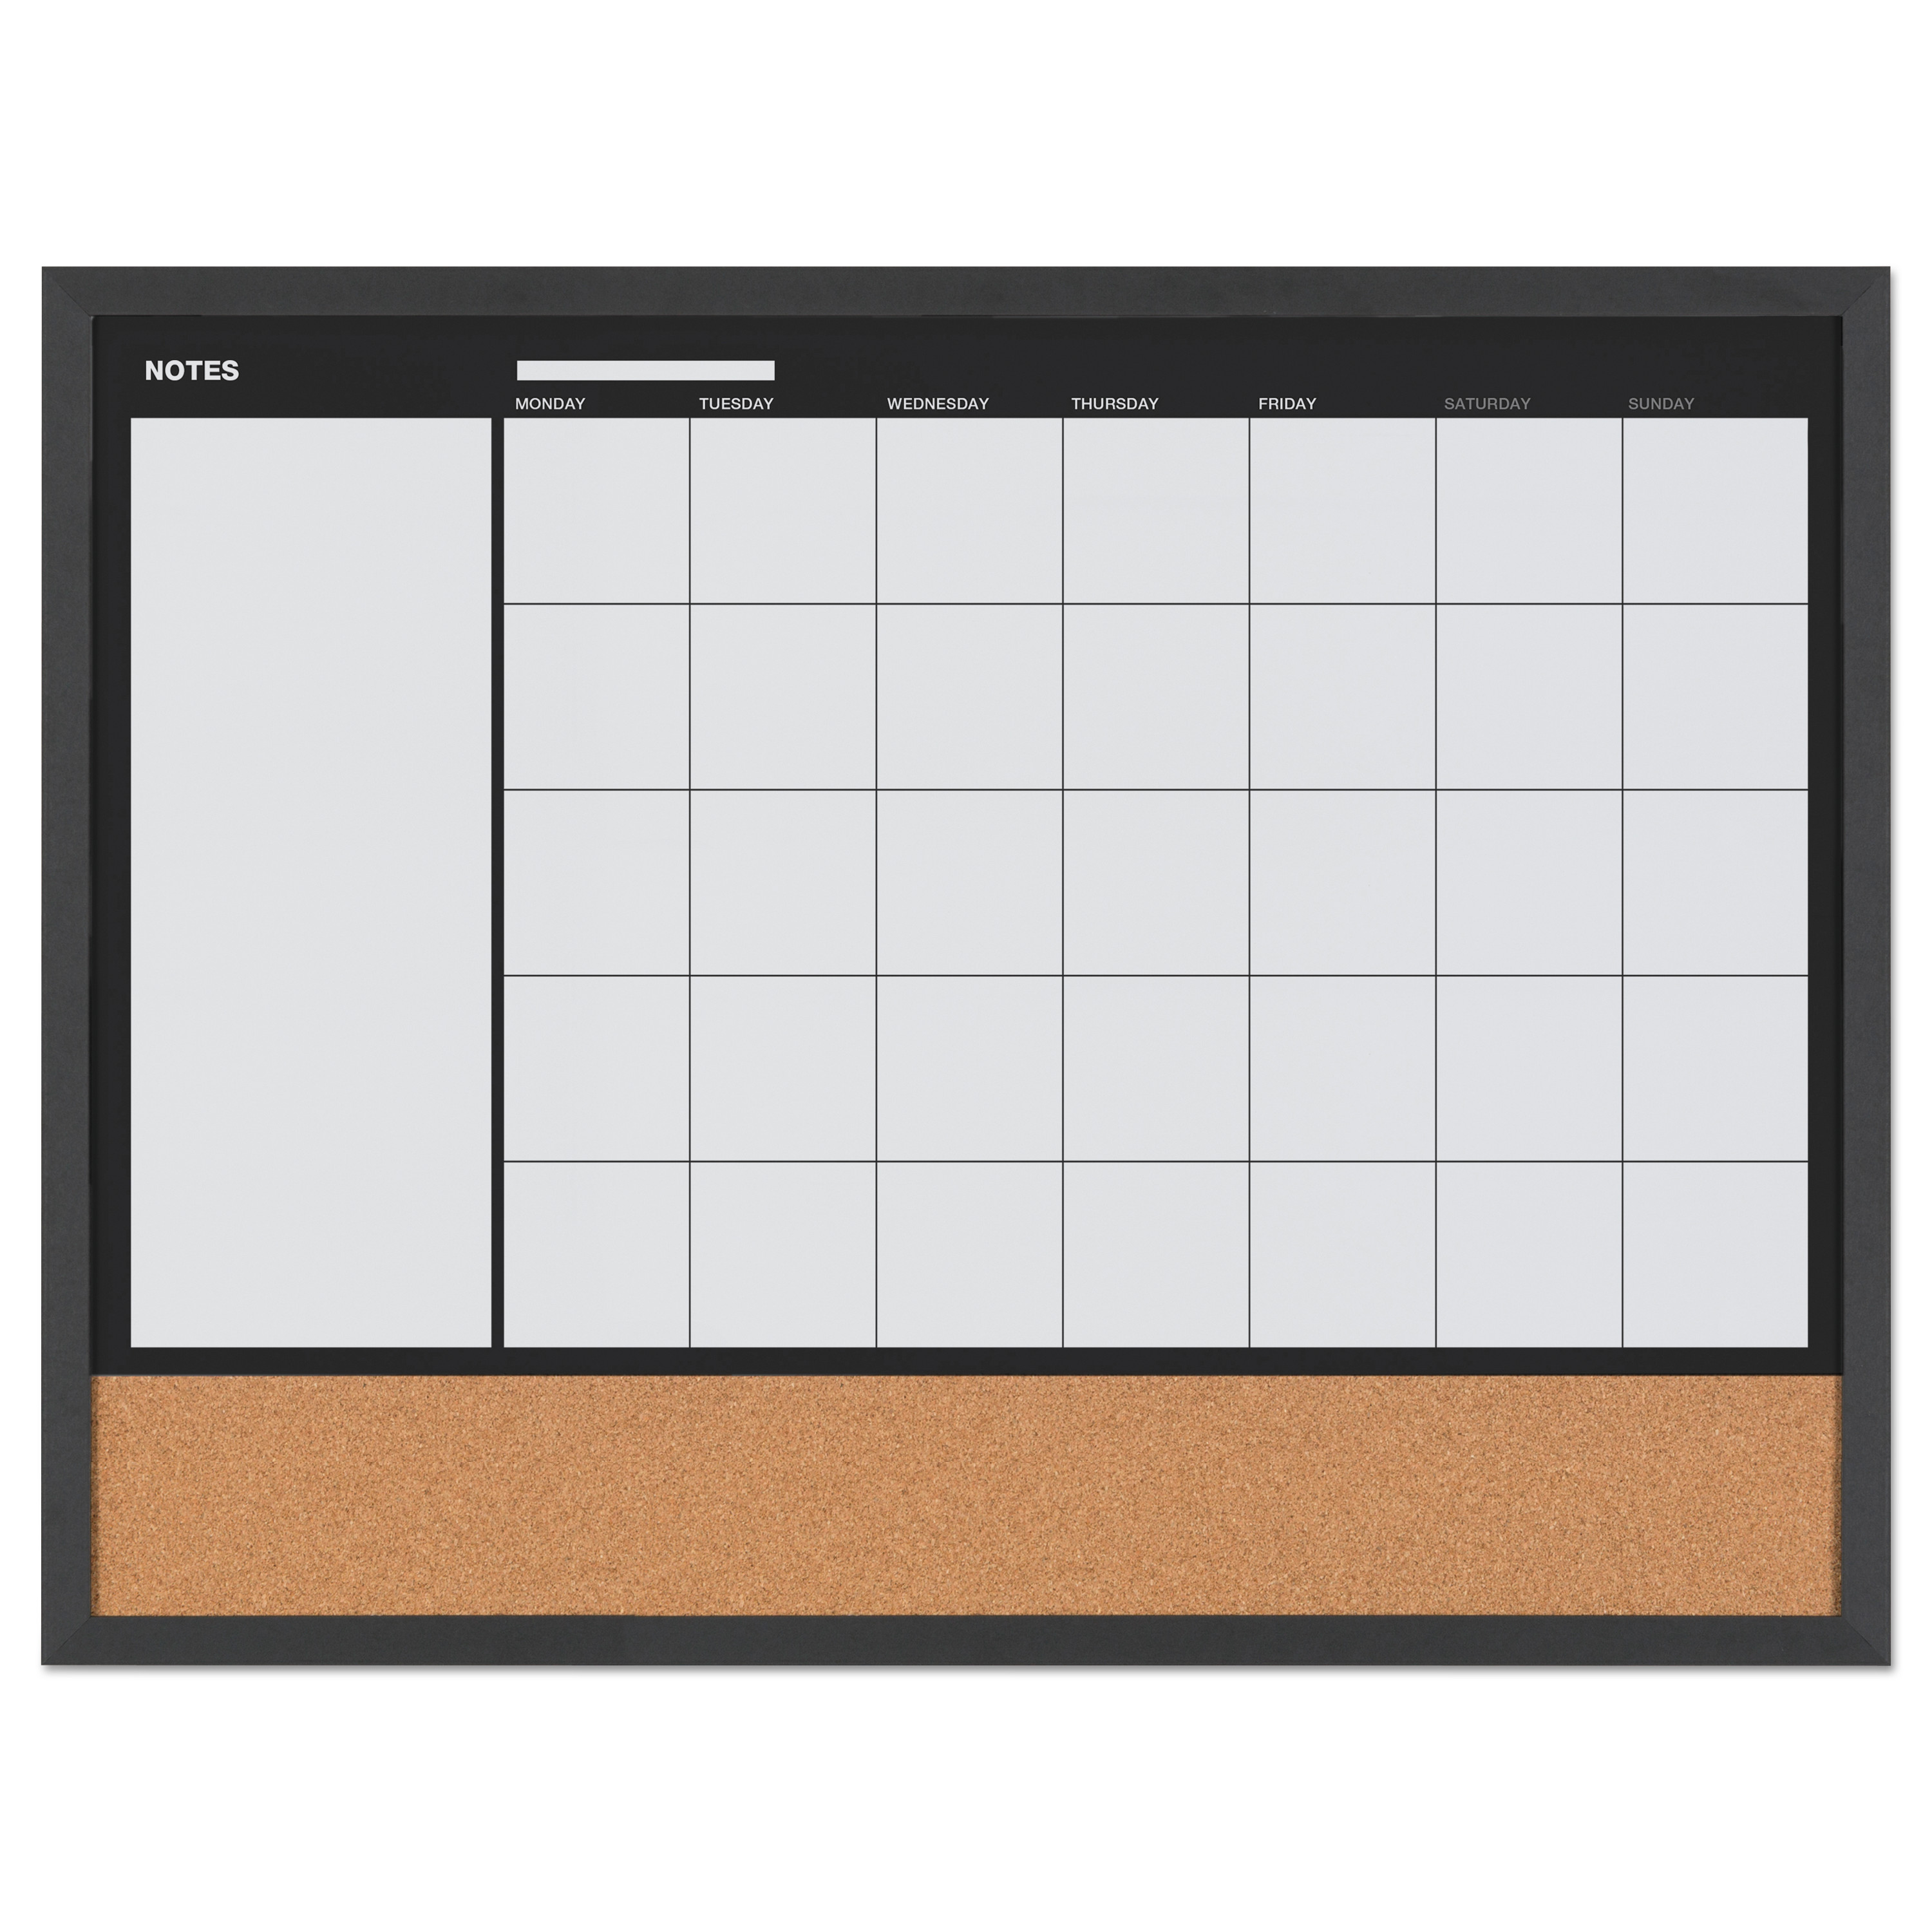  MasterVision MX04511161 3-In-1 Combo Planner, 24.21 x 17.72, White, MDF Frame (BVCMX04511161) 